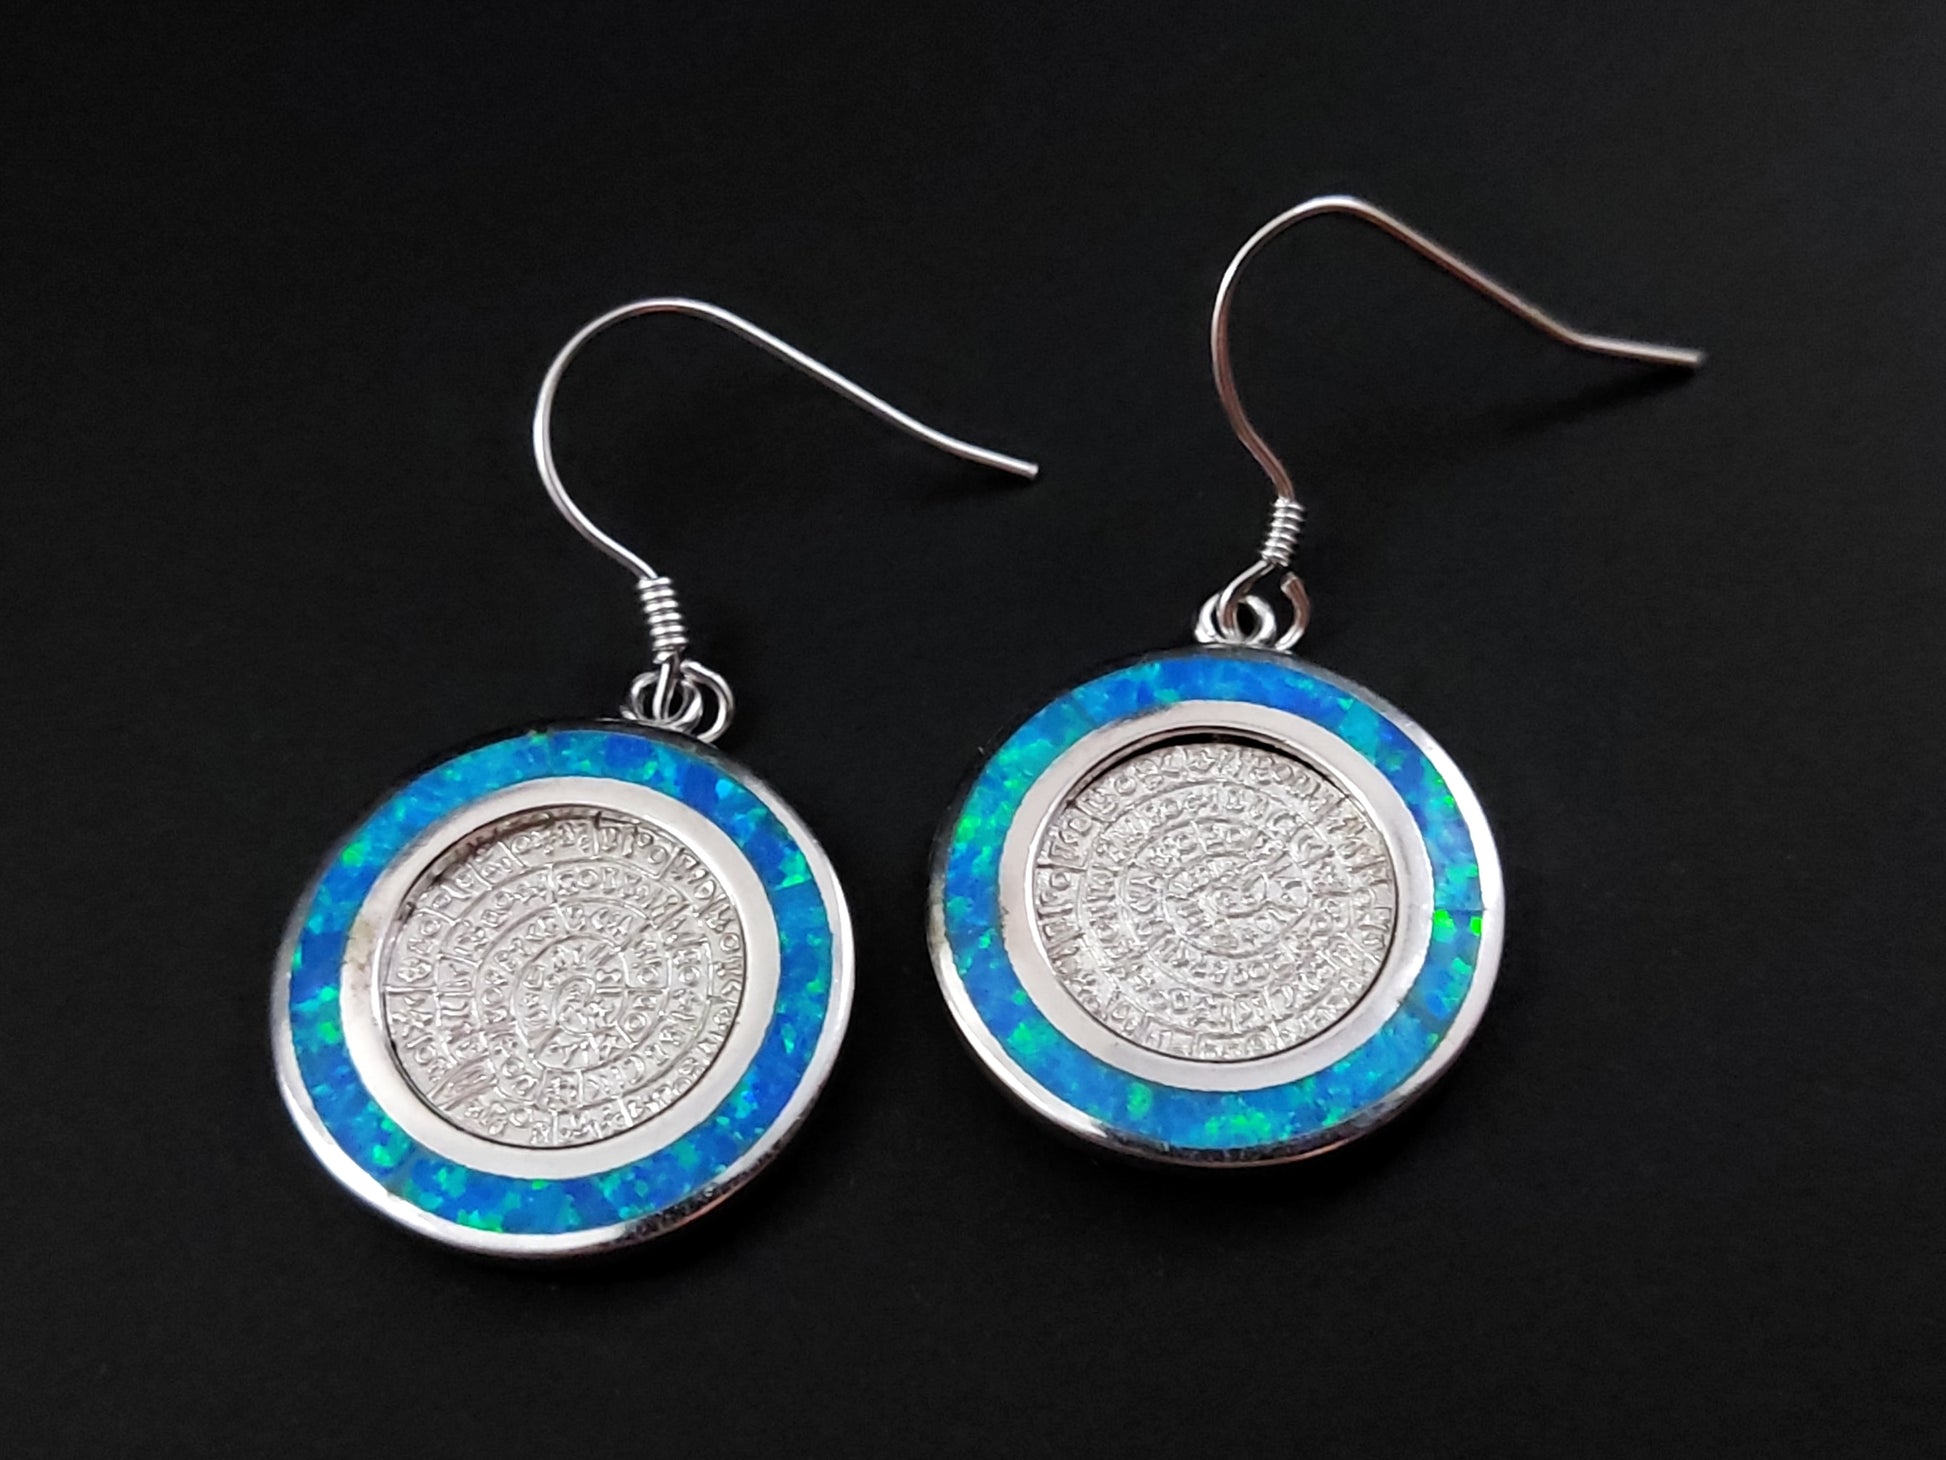 Greek silver earrings with the Phaistos Disc design with blue opal stones measuring 19mm in diameter.